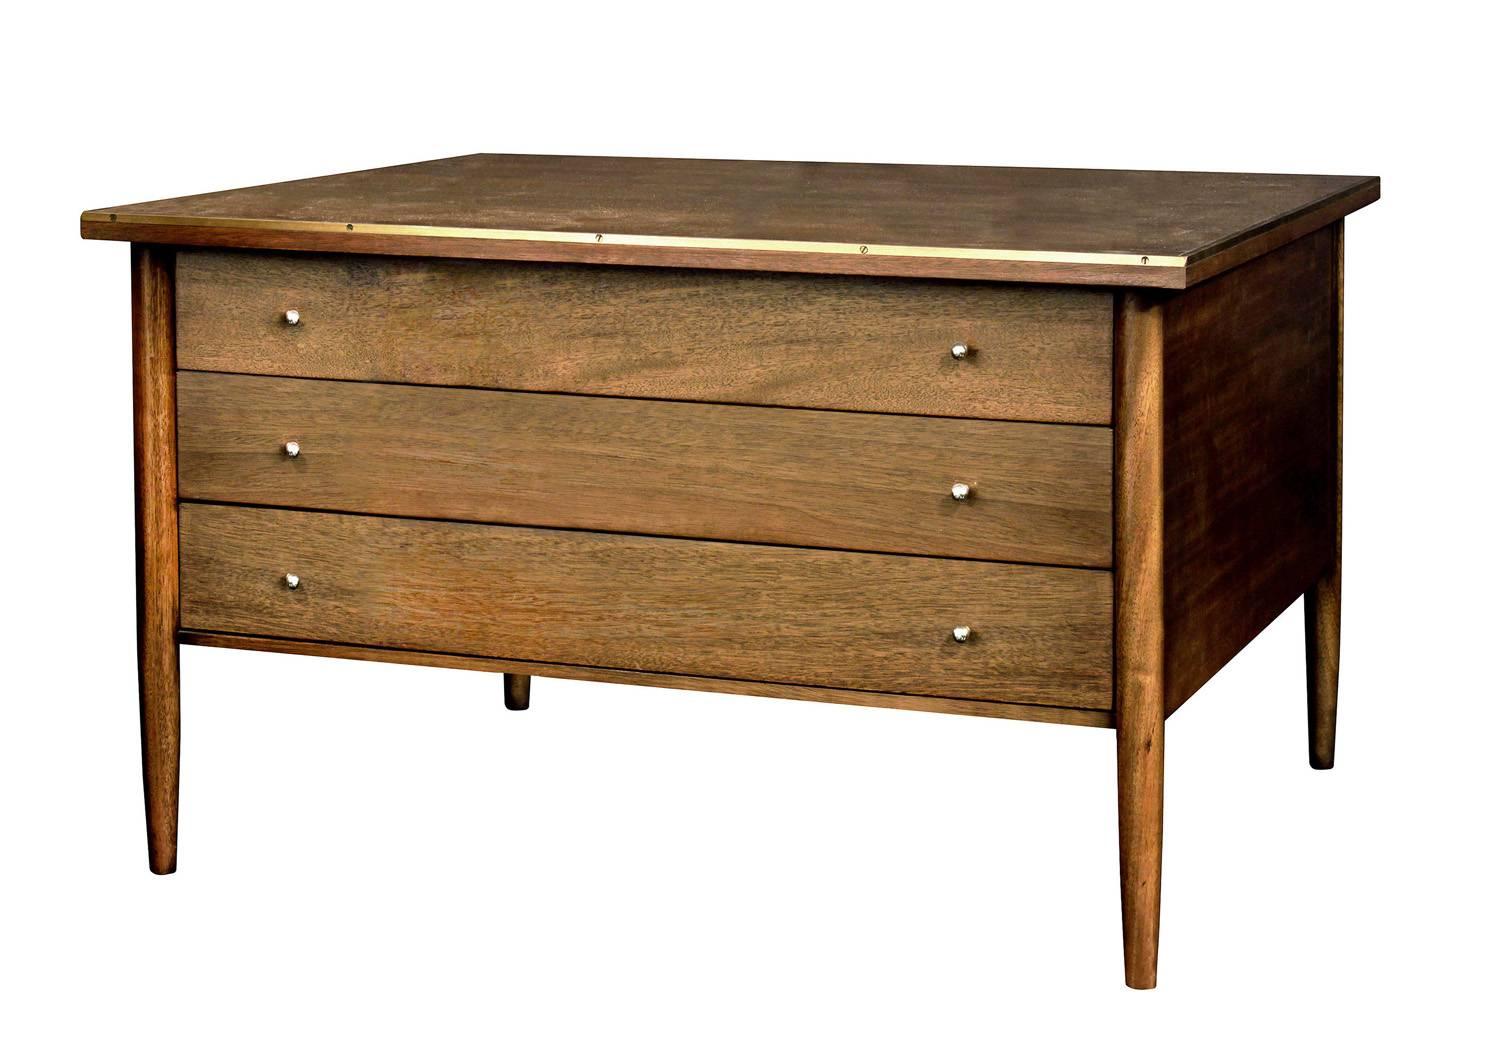 Inlaid brass edged coffee and end table model no. 7012 in mahogany with three drawers by Paul McCobb, American, 1950s.